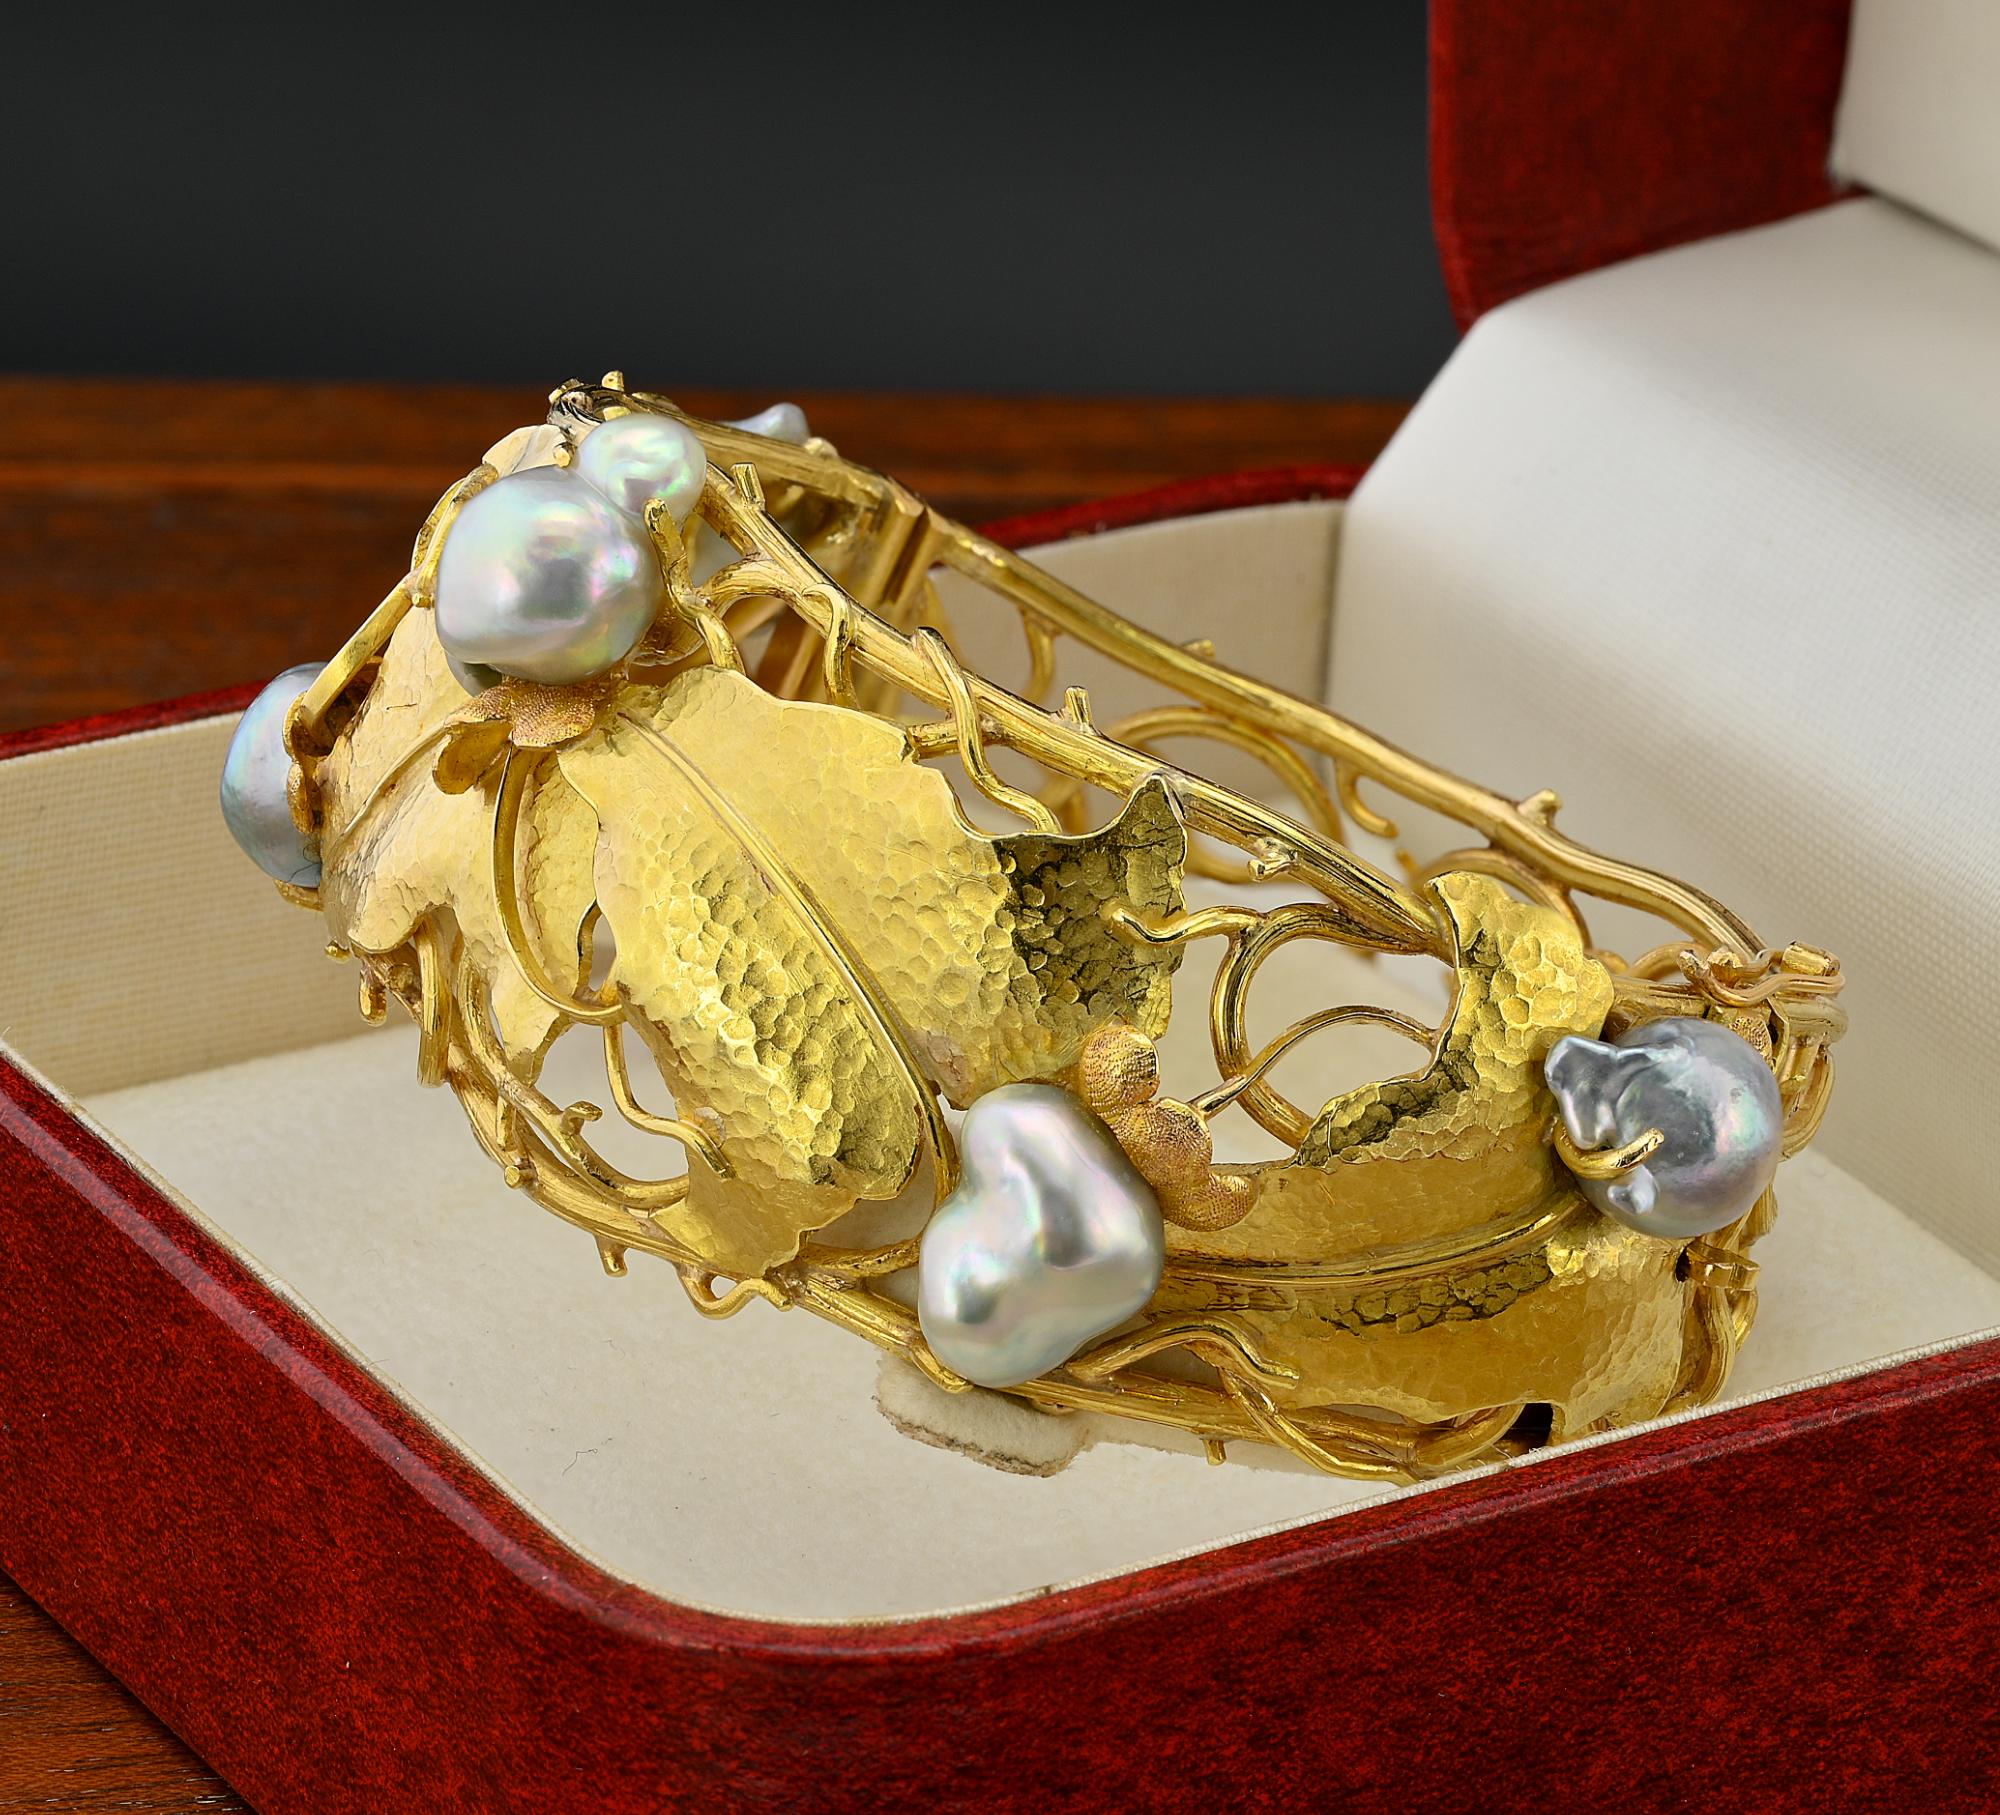  Signed Cecconi Leaf and Pearl 18 KT Mid-century Bangle For Sale 3